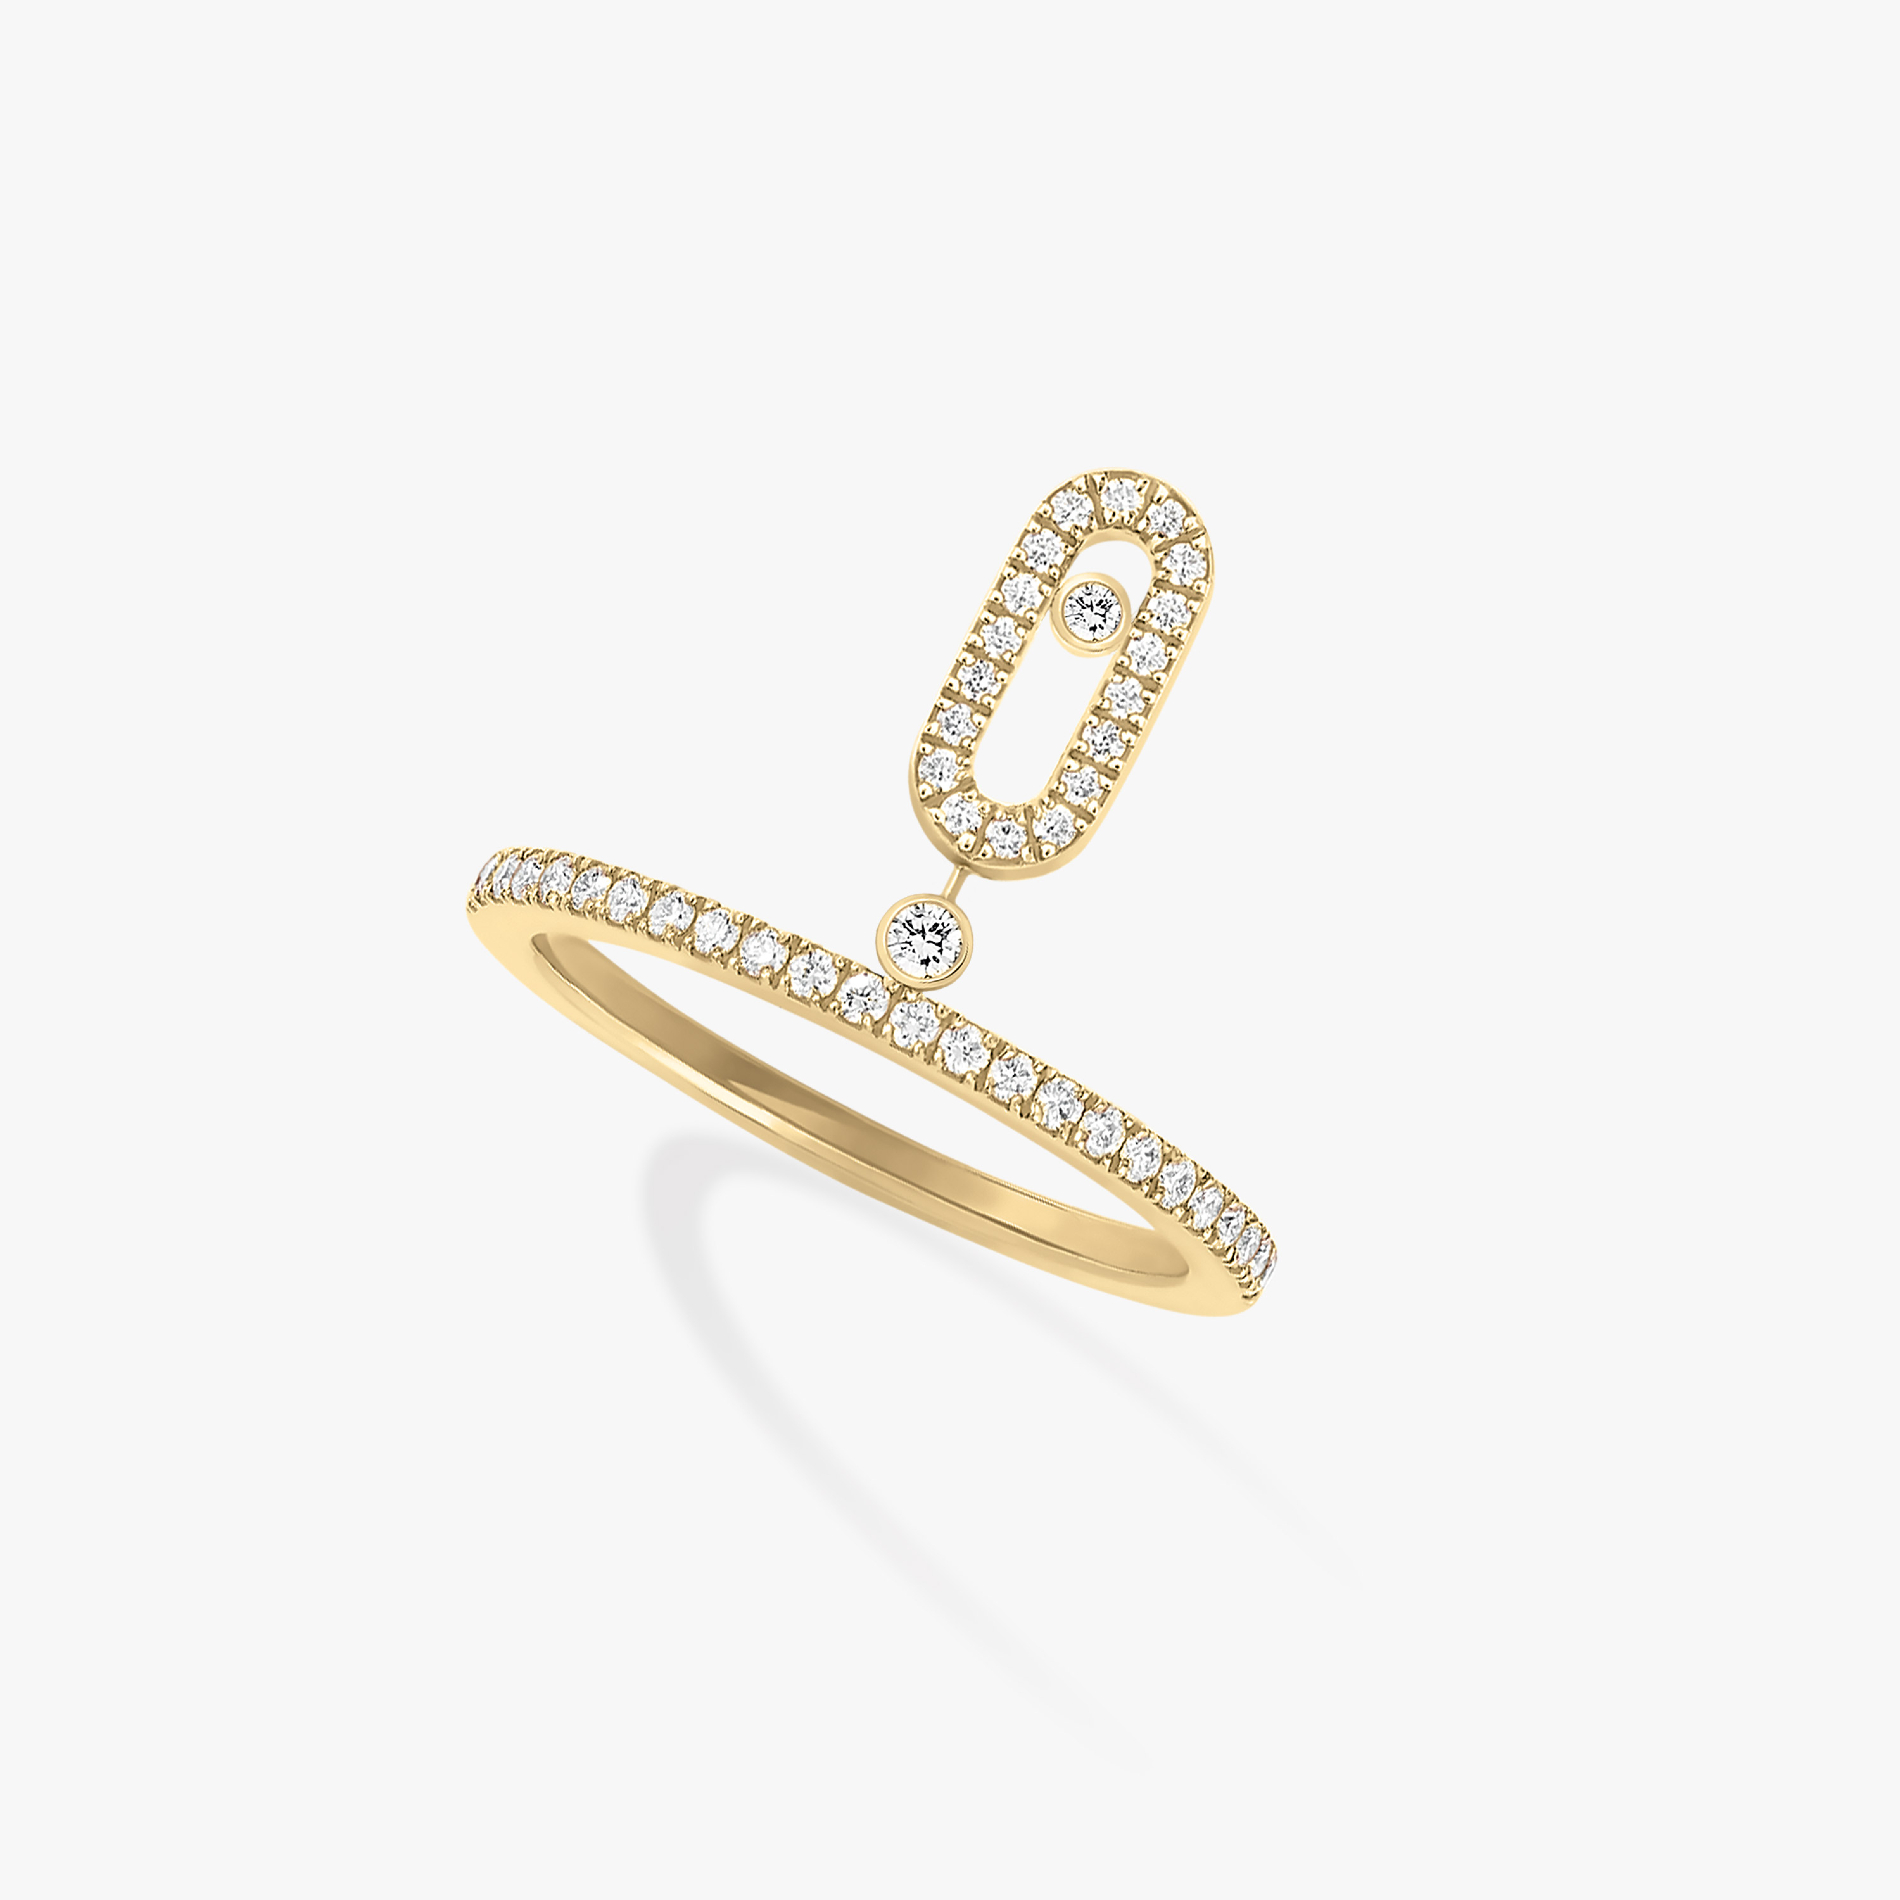 Move Uno Pavé Drop Yellow Gold For Her Diamond Ring 11163-YG